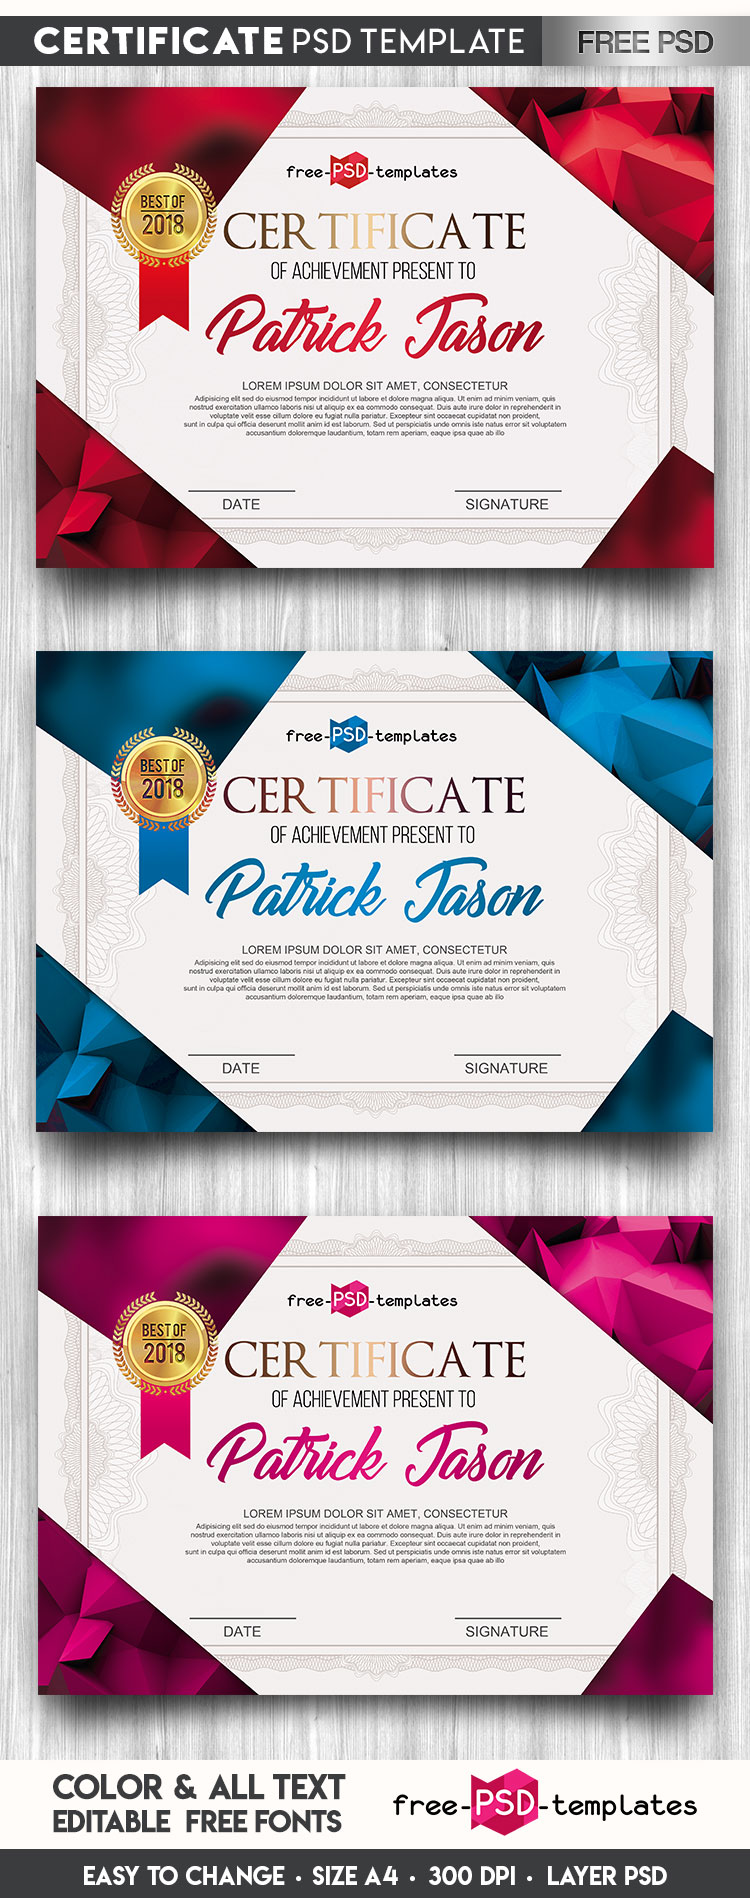 Download Free Certificate Template IN PSD | Free-PSD-Templates